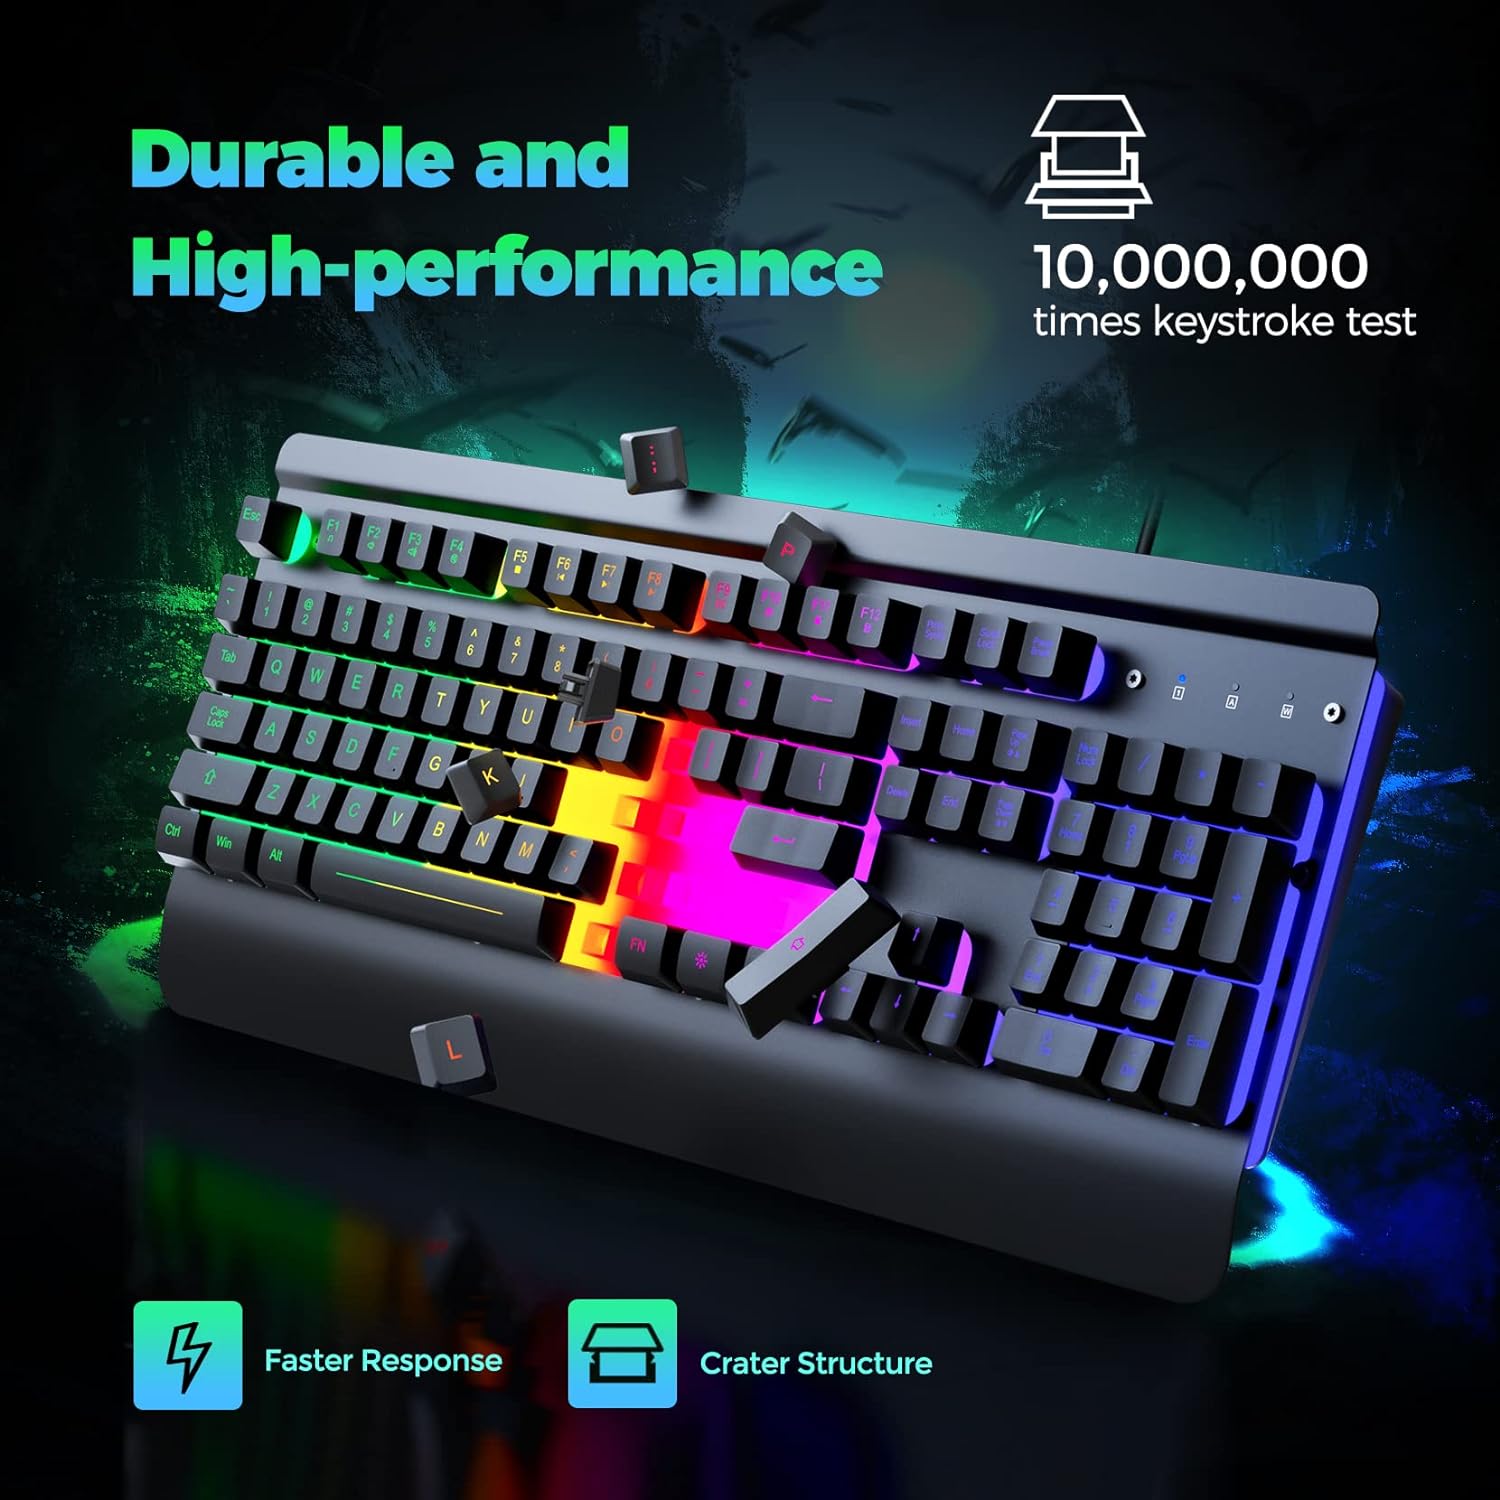 Gaming Keyboard, 104 Keys All-Metal Panel, Dacoity Rainbow LED Backlight Quiet Keyboard, Wrist Rest, Waterproof Light-Up USB Wired Keyboard for Office PC, Mac Xbox